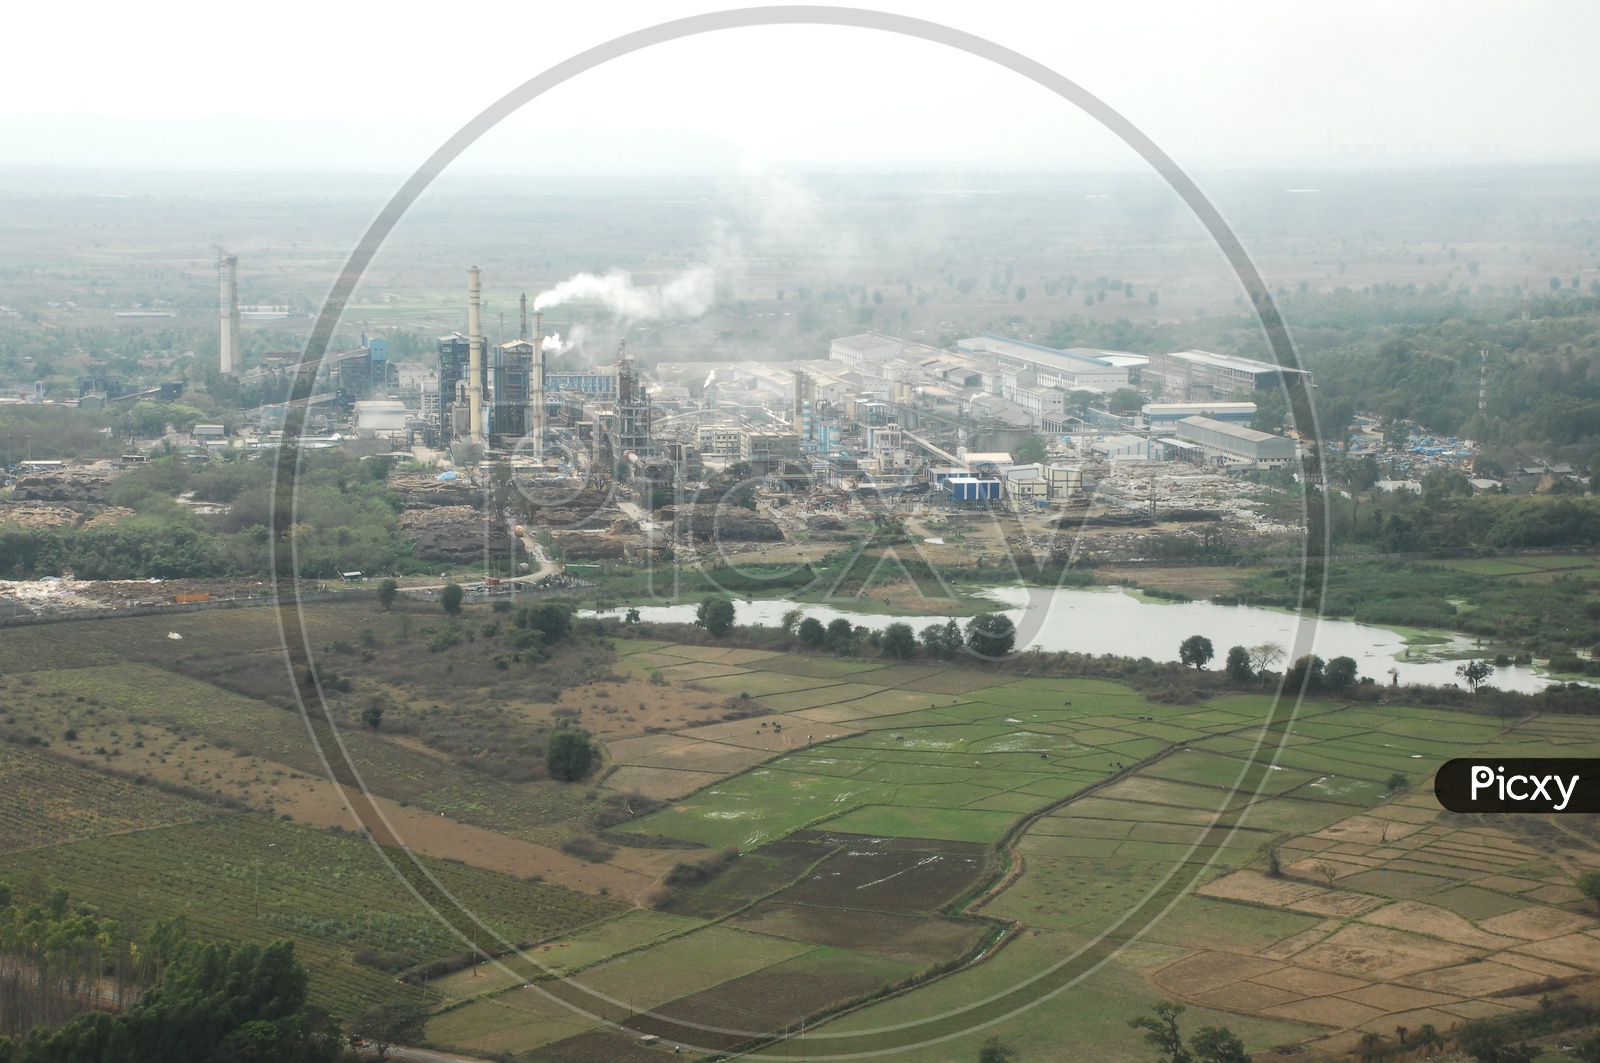 Aerial View of an Industry / Factory with agriculture fields in the foreground